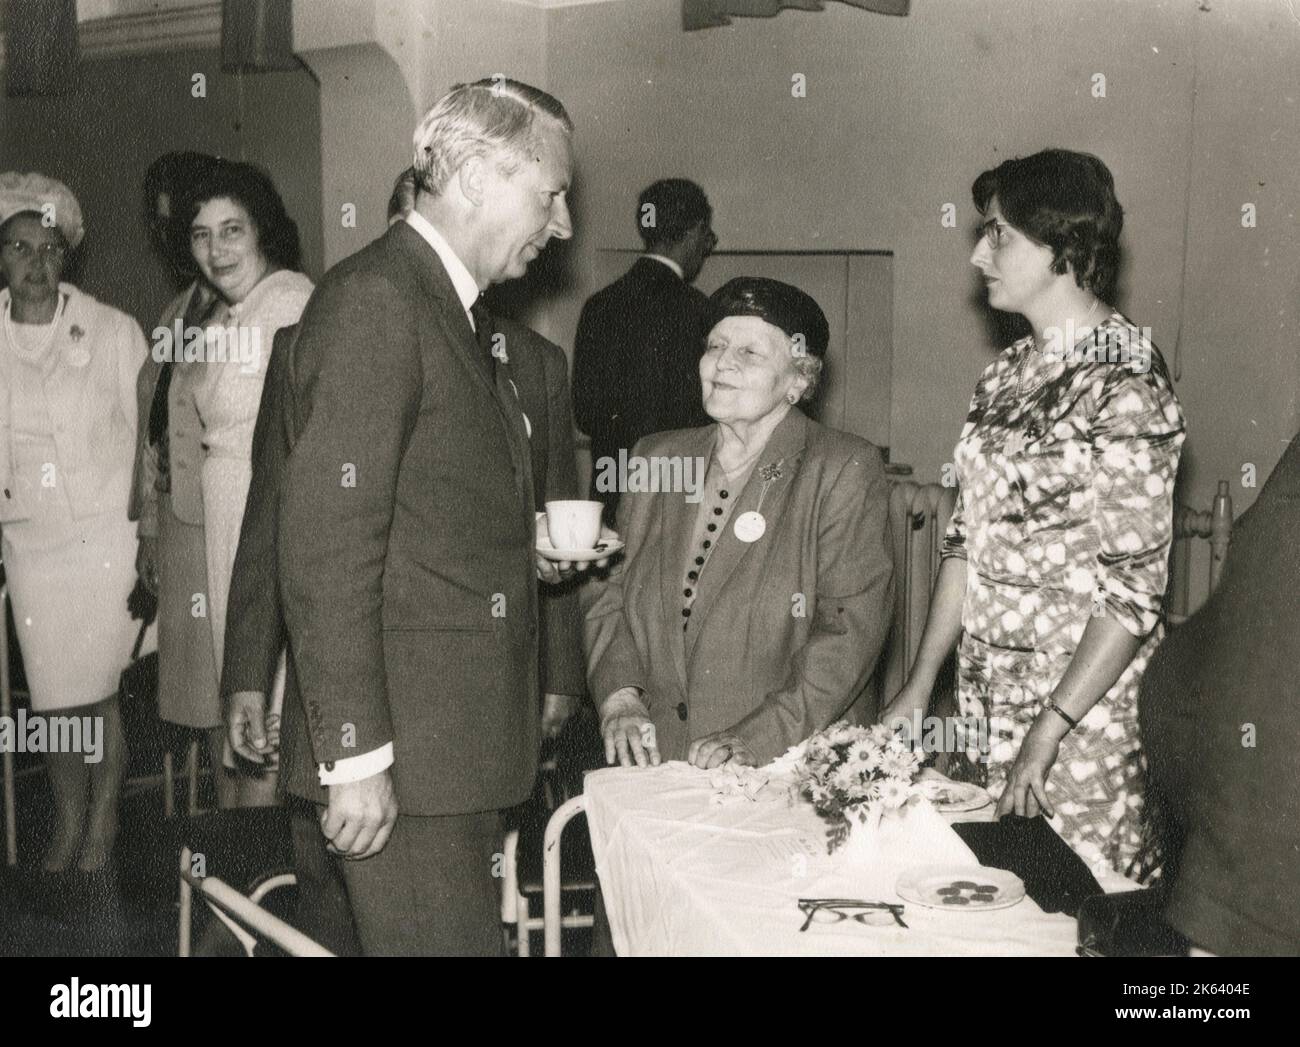 Sir Edward Richard George 'Ted' Heath (1916-2005) - British politician who served as Prime Minister of the United Kingdom from 1970 to 1974 and Leader of the Conservative Party from 1965 to 1975. Pictured here chatting to some ladies at a Conservative Party event. Stock Photo